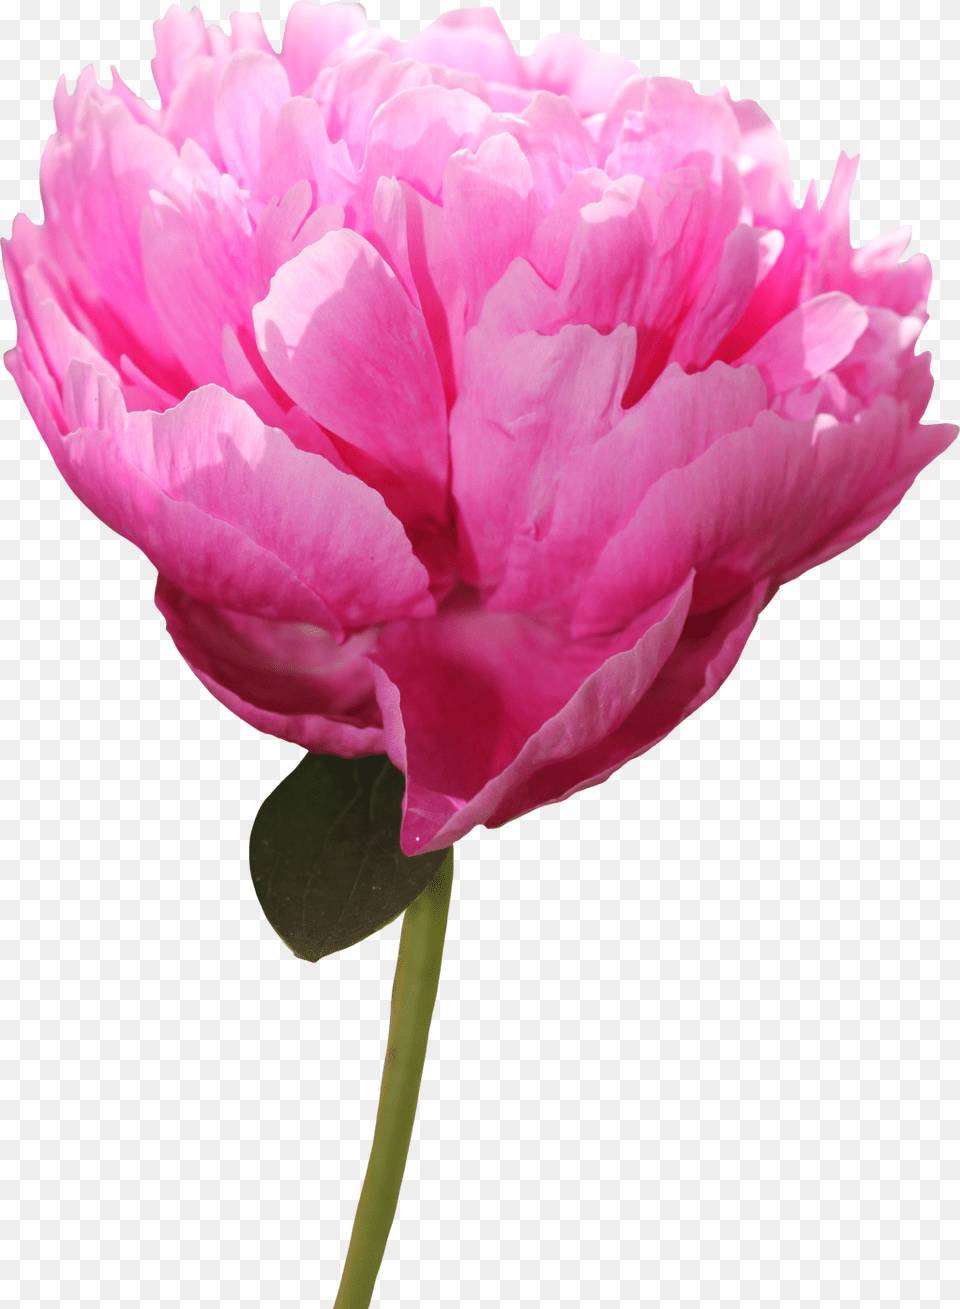 Peony Picture For Designing Purpose Peony, Flower, Plant, Rose, Carnation Free Png Download